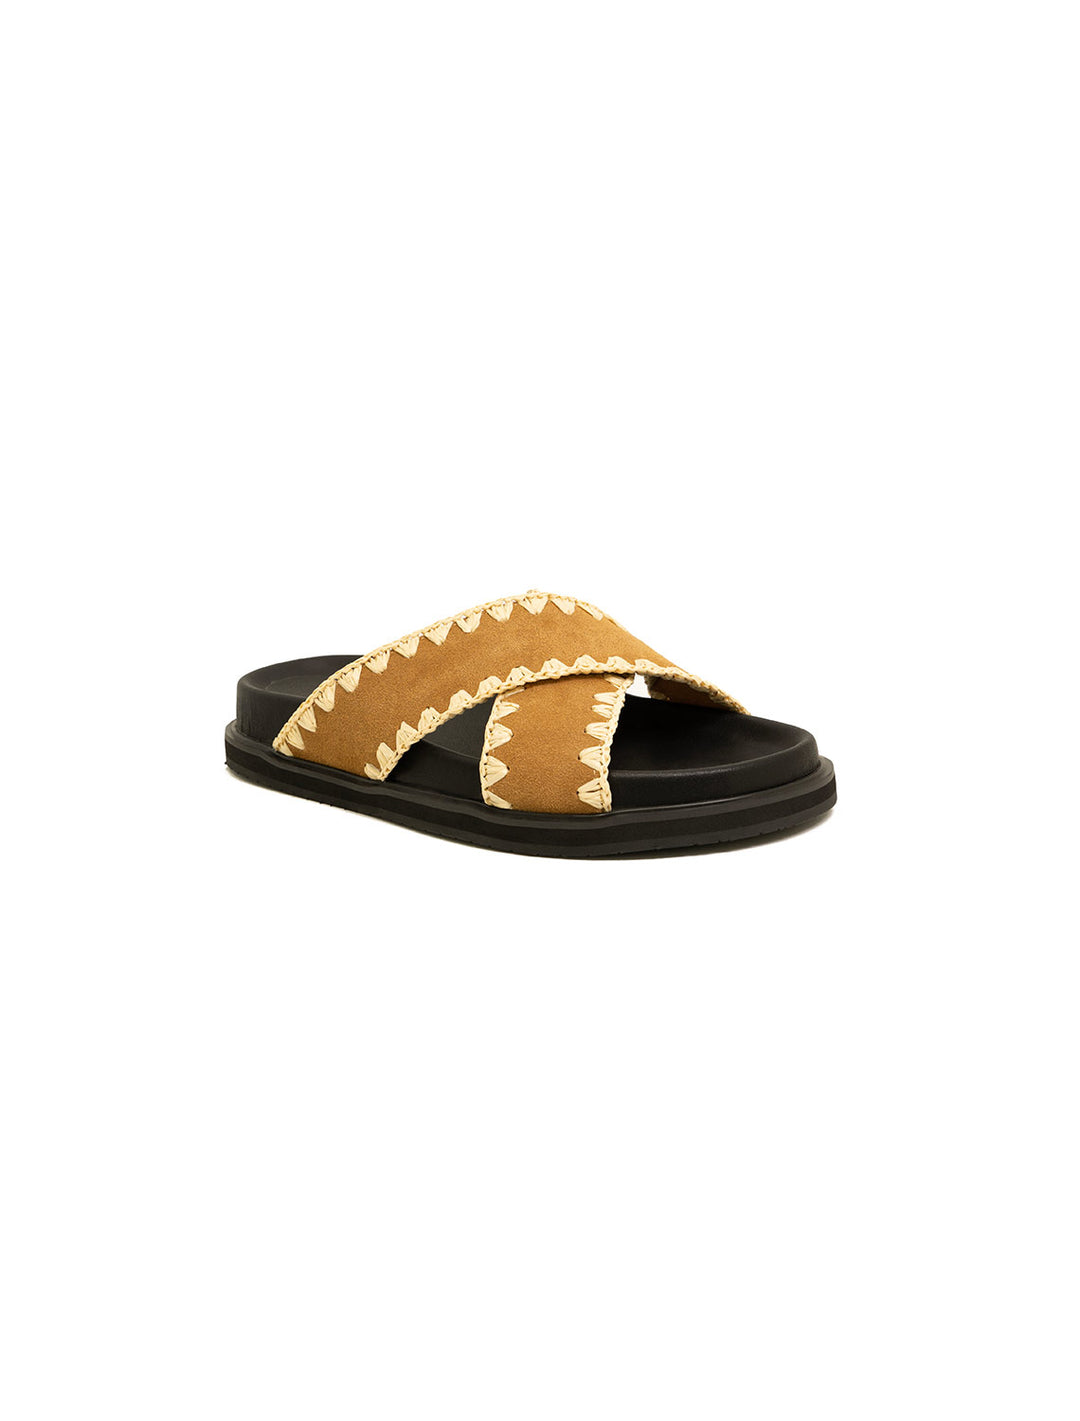 Front angle view of Suncoo Paris' Hedwina Sandals in Camel.